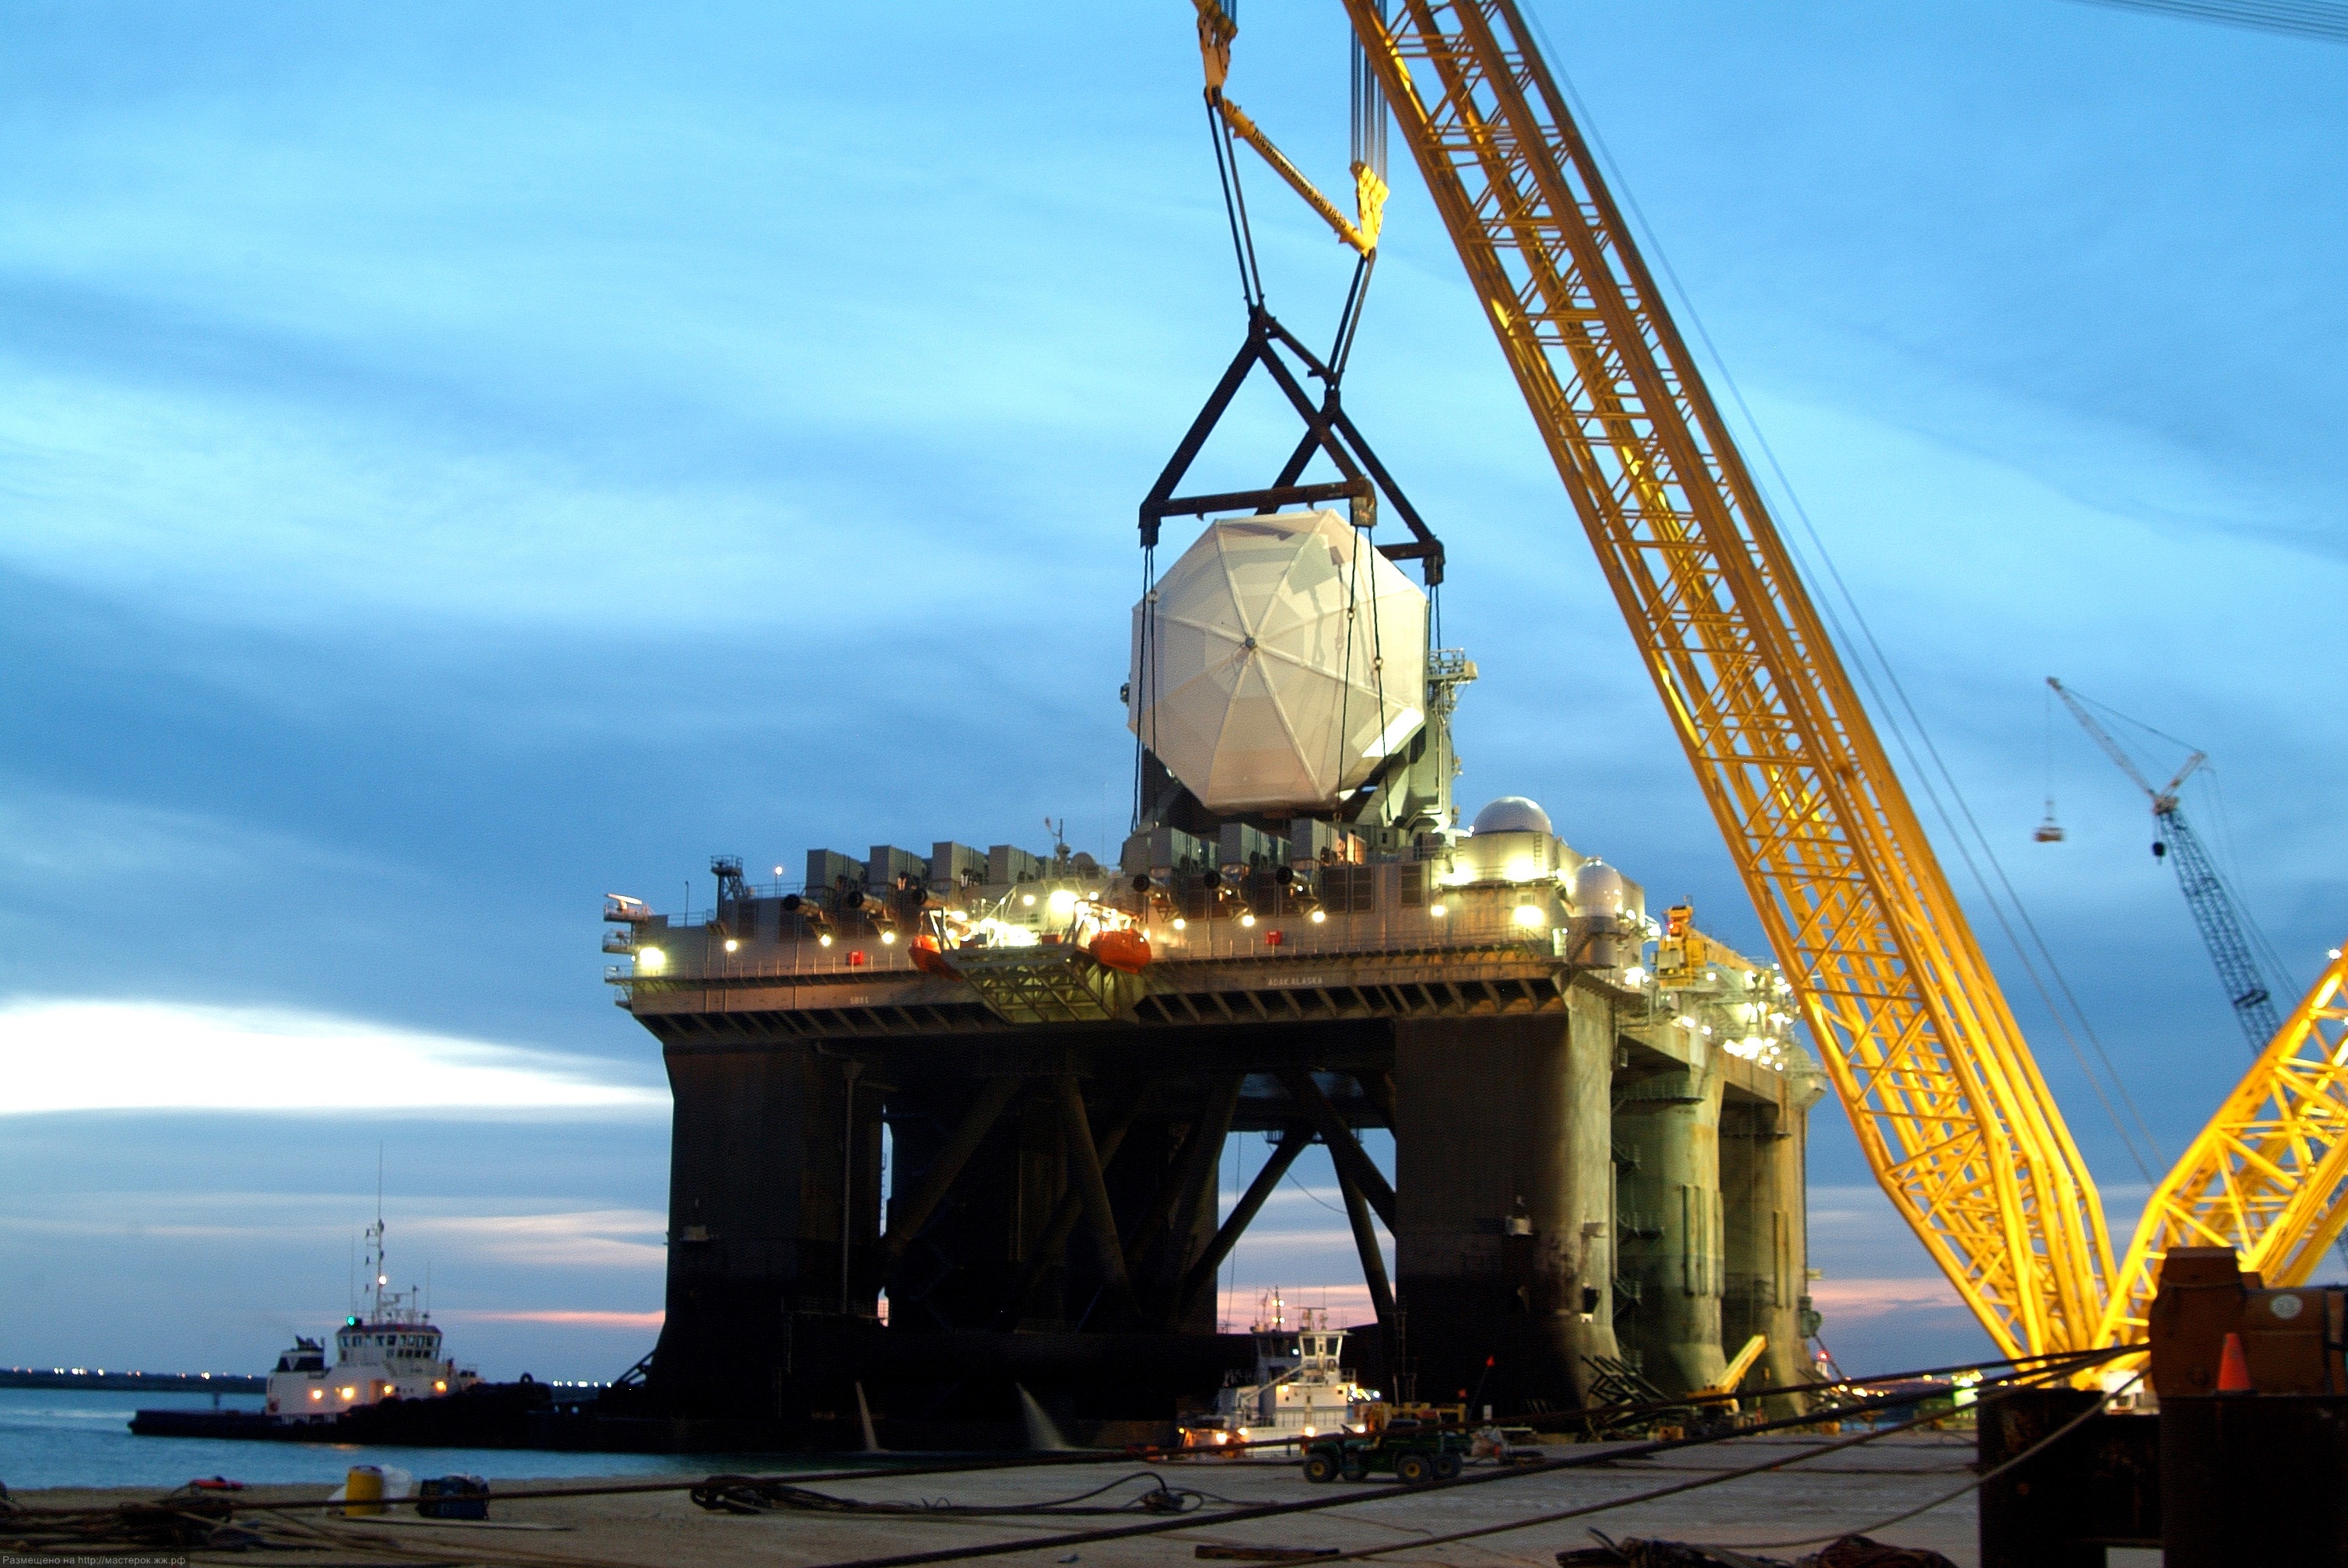 050403-D-0000X-001<br /> A 4-million pound radar assembly is lowered into place aboard a converted offshore oil rig at the Kiewit Offshore Services in Corpus Christi, Texas, on April 3, 2005, for what will become the Sea-Based X-band Radar for the Missile Def